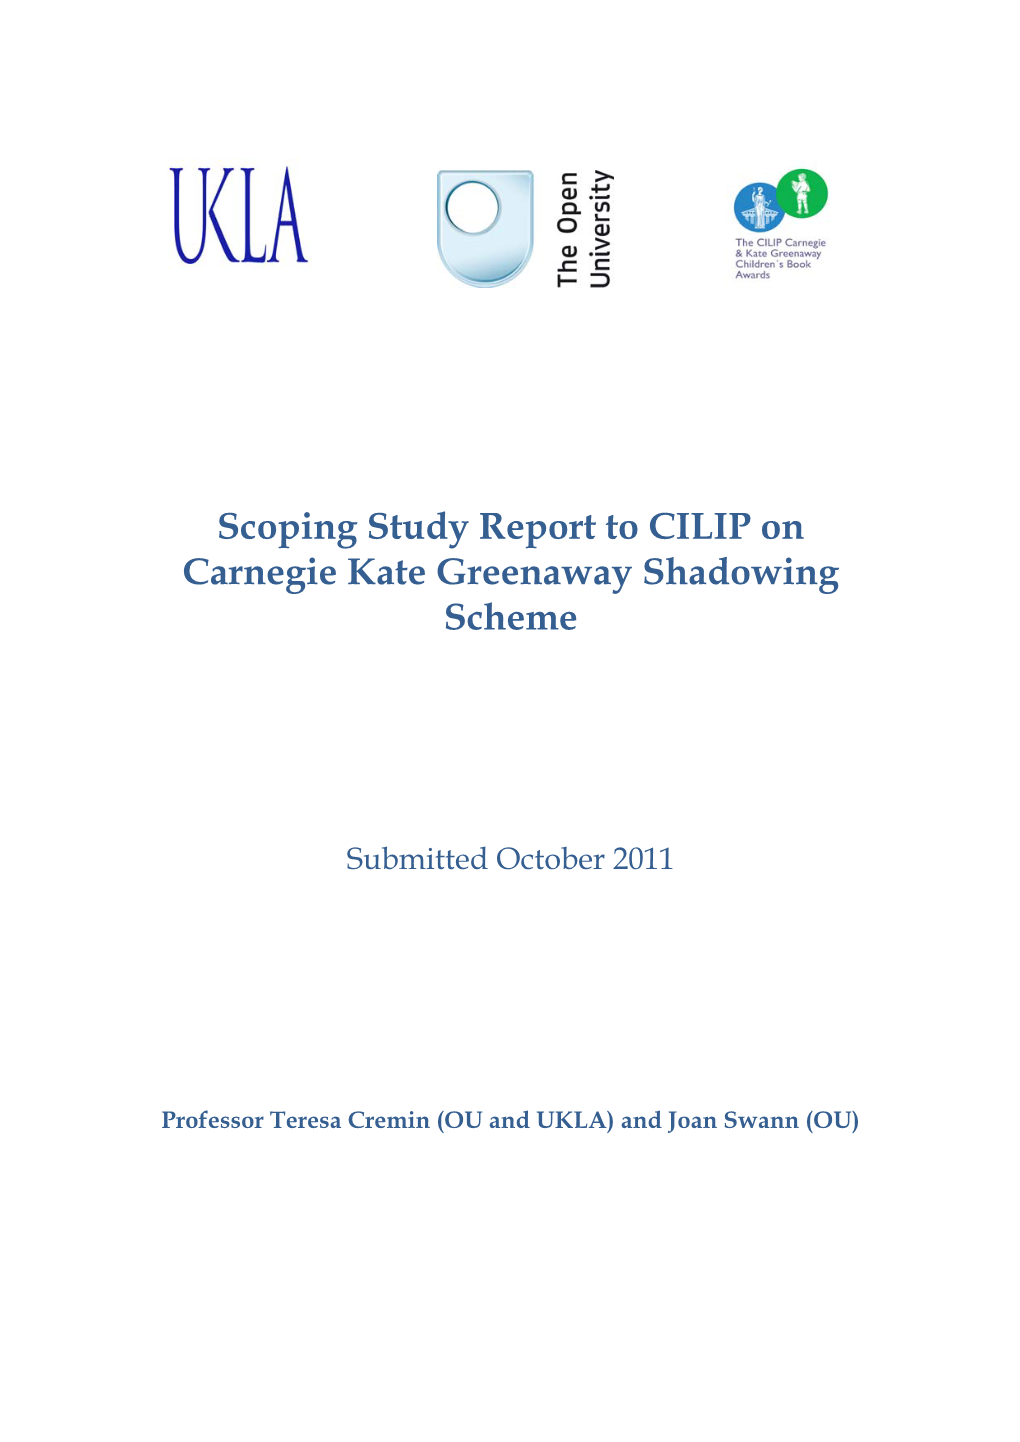 Scoping Study Report to CILIP on Carnegie Kate Greenaway Shadowing Scheme